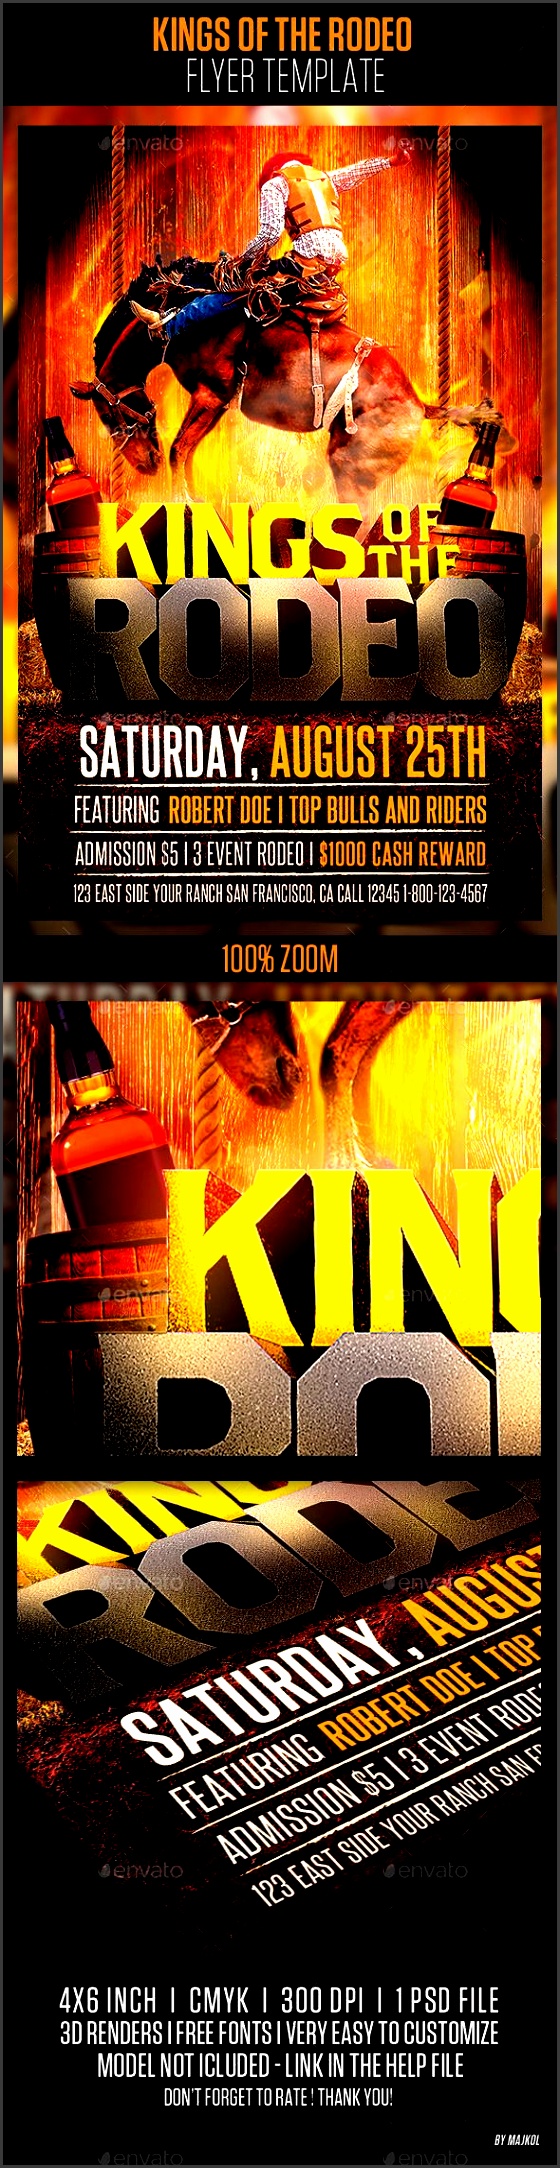 kings of the rodeo flyer template